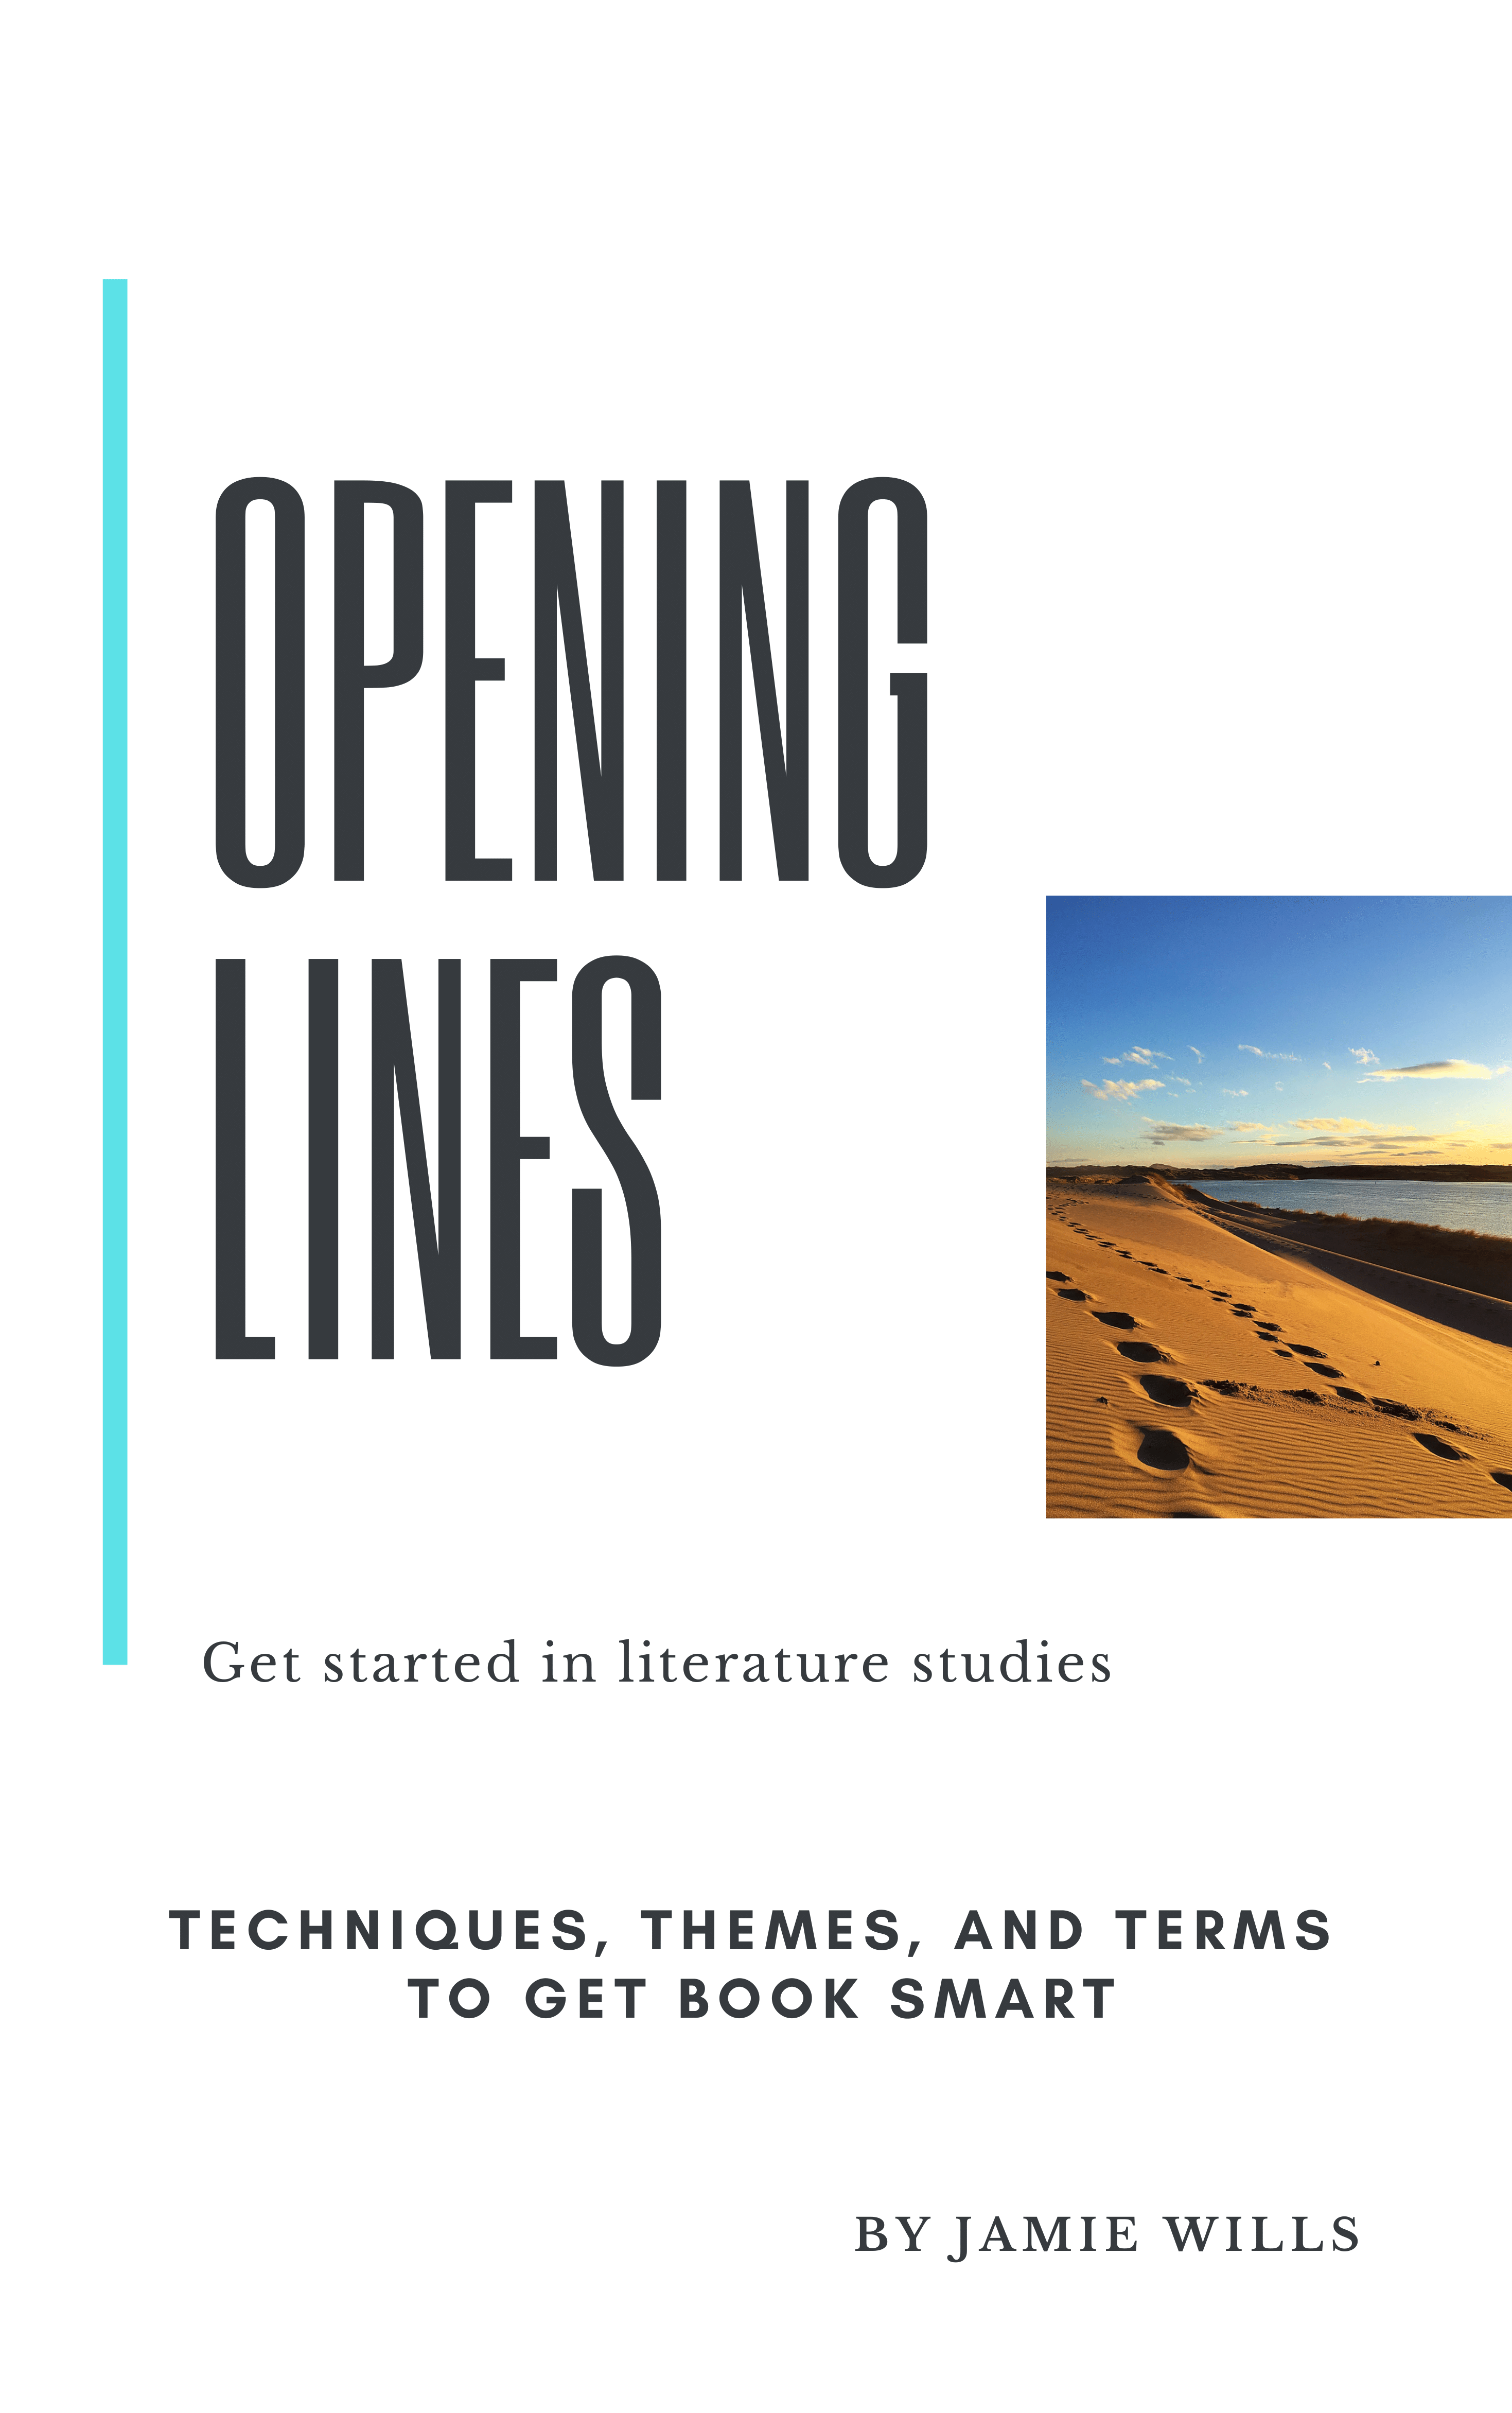 Opening Lines - Learn literary techniques and themes through classic texts